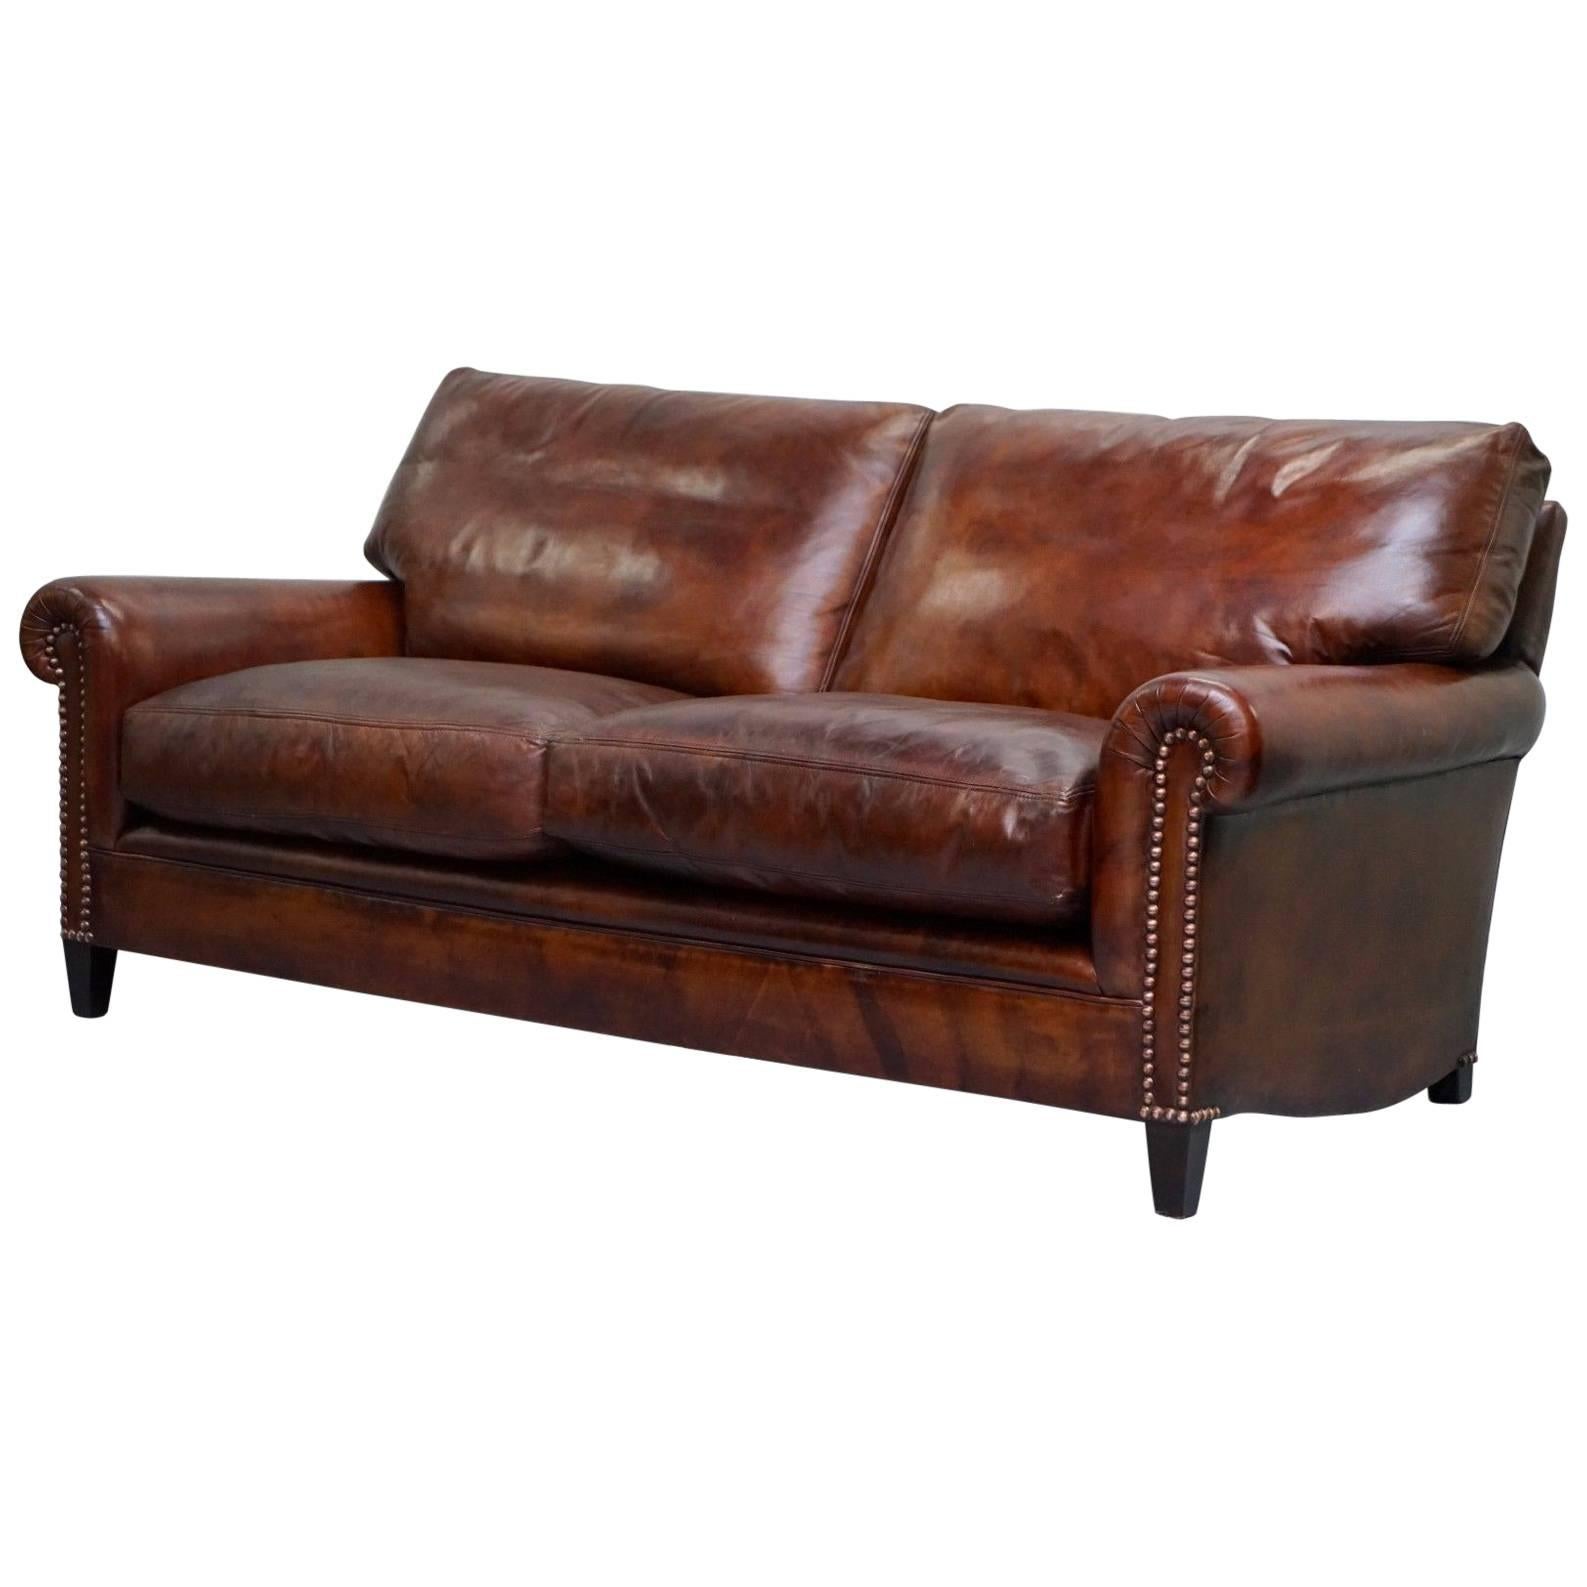 Fully Restored George Smith Aged Whiskey Brown Leather Signature Sofa Feathers